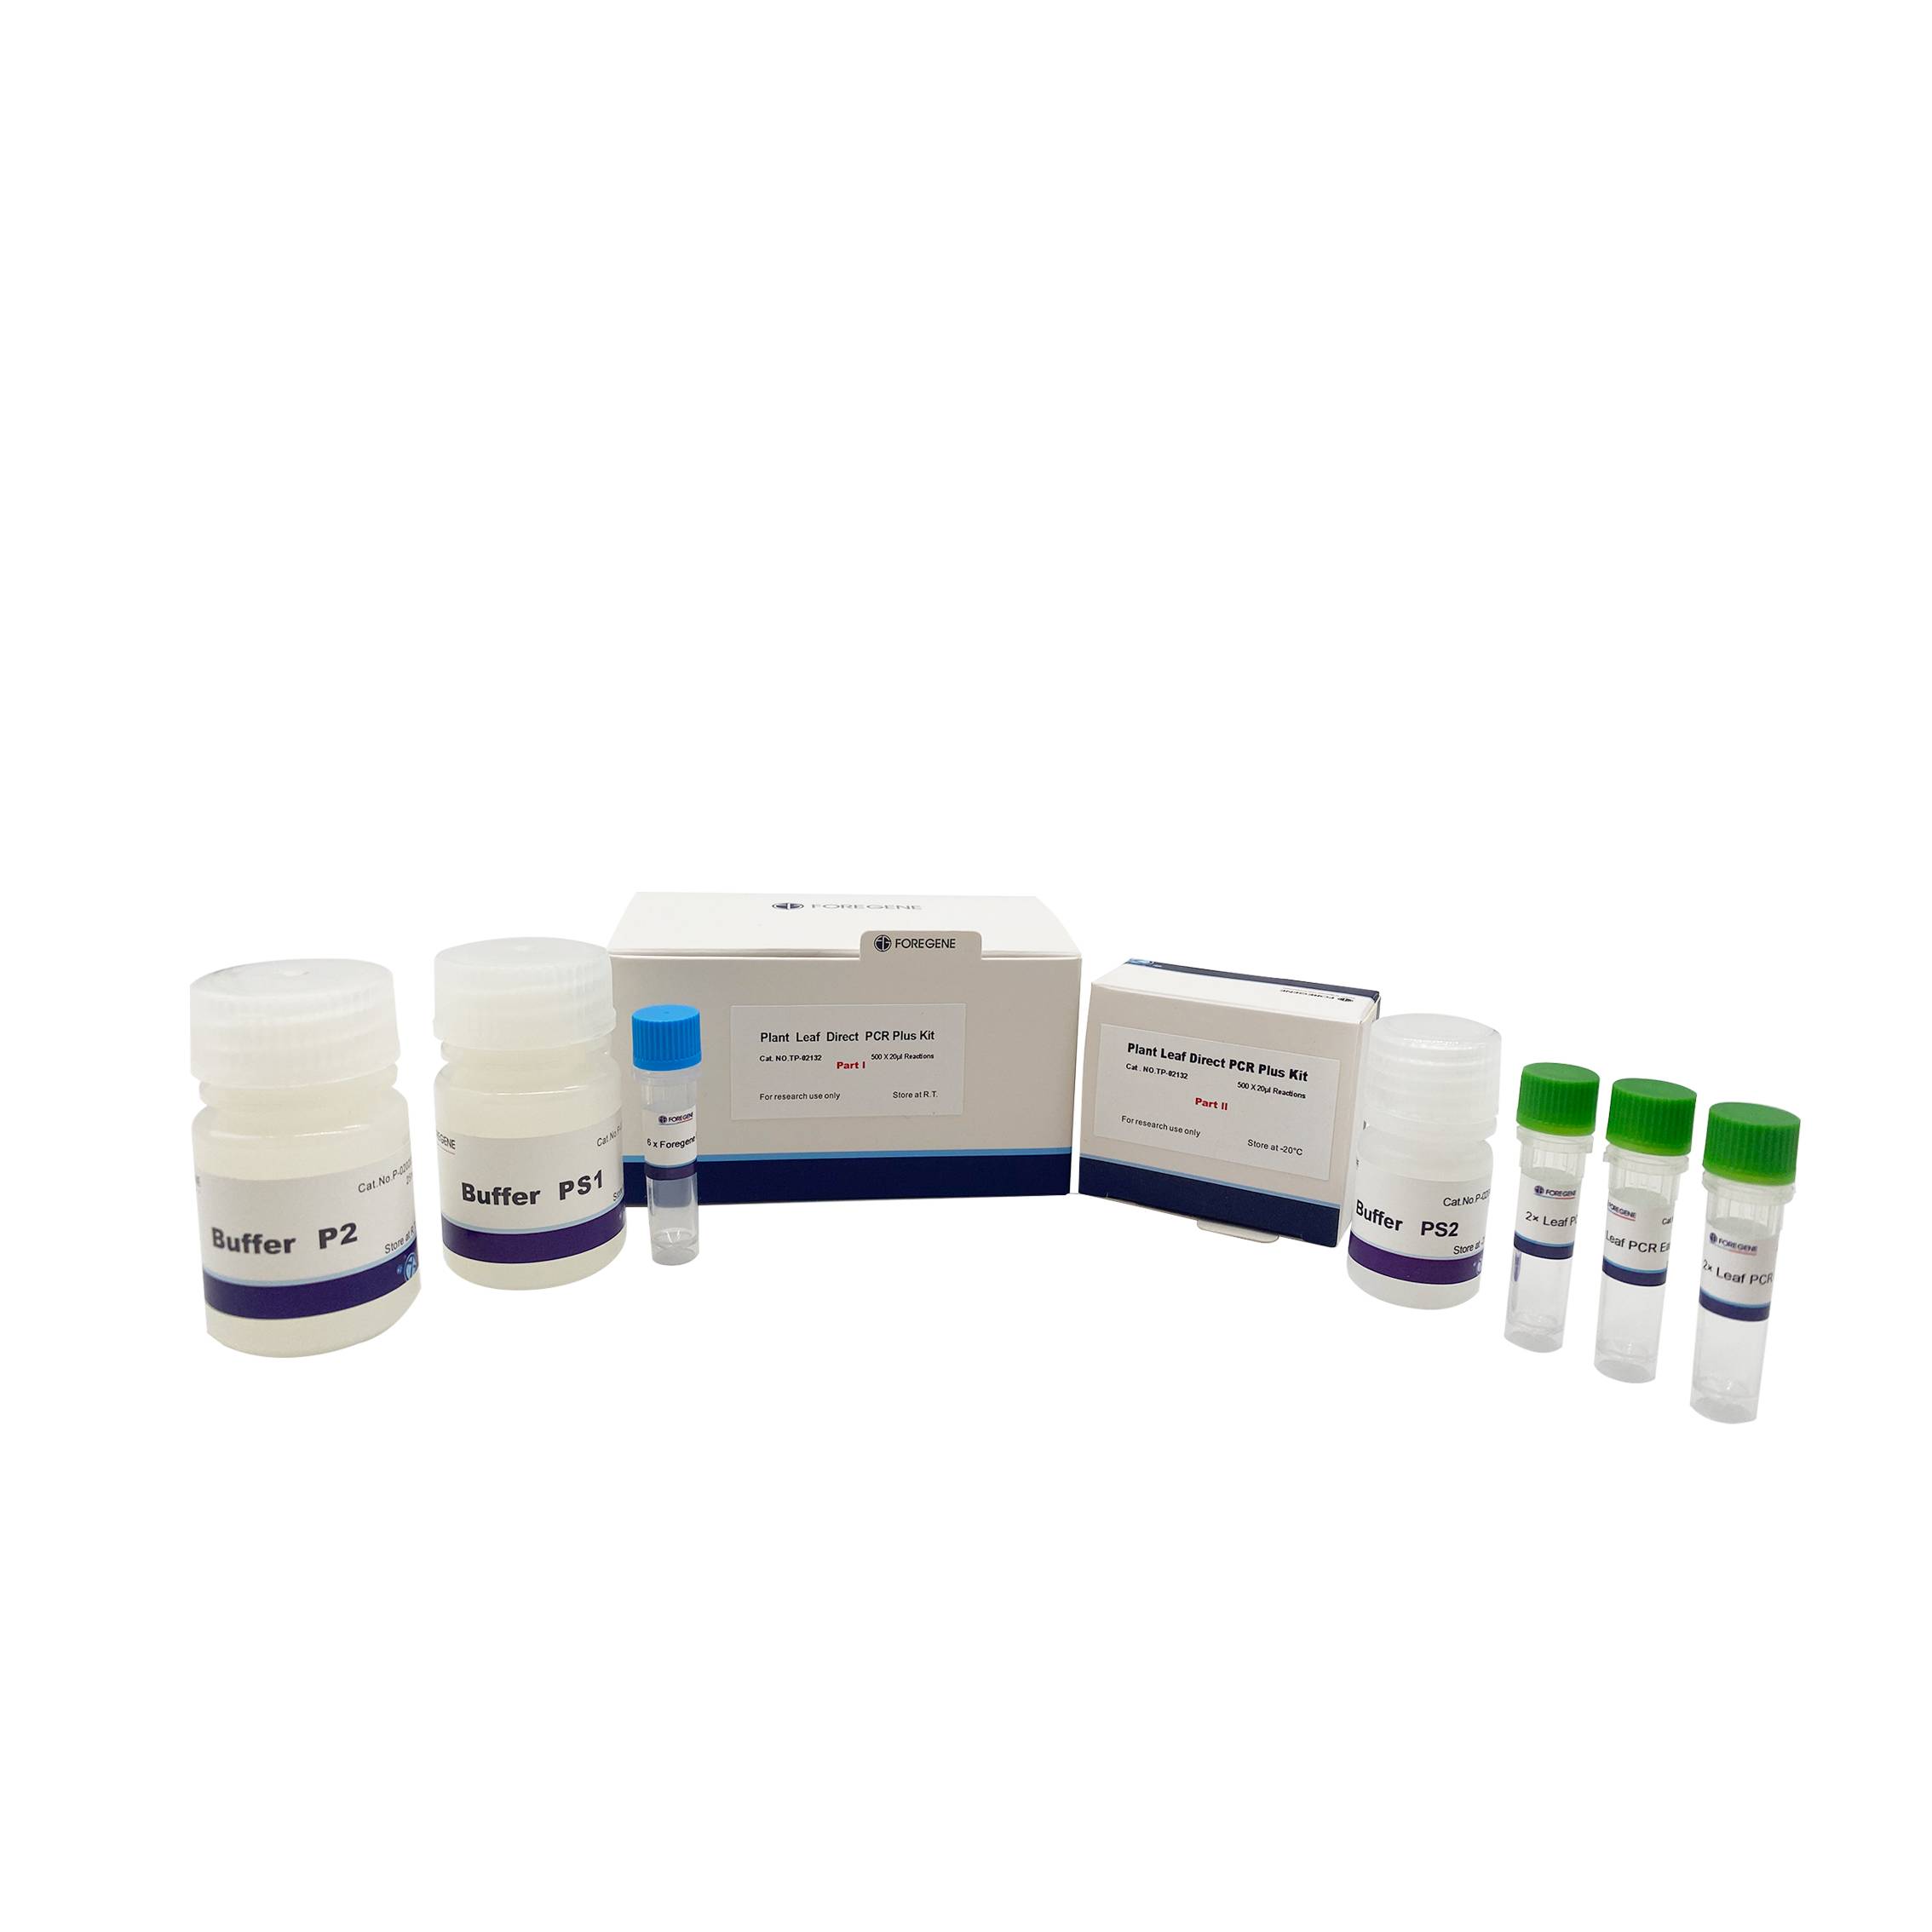 Plant leaf Direct PCR Plus kit (without Sampling Tools) Protocol Direct PCR from Plant Material